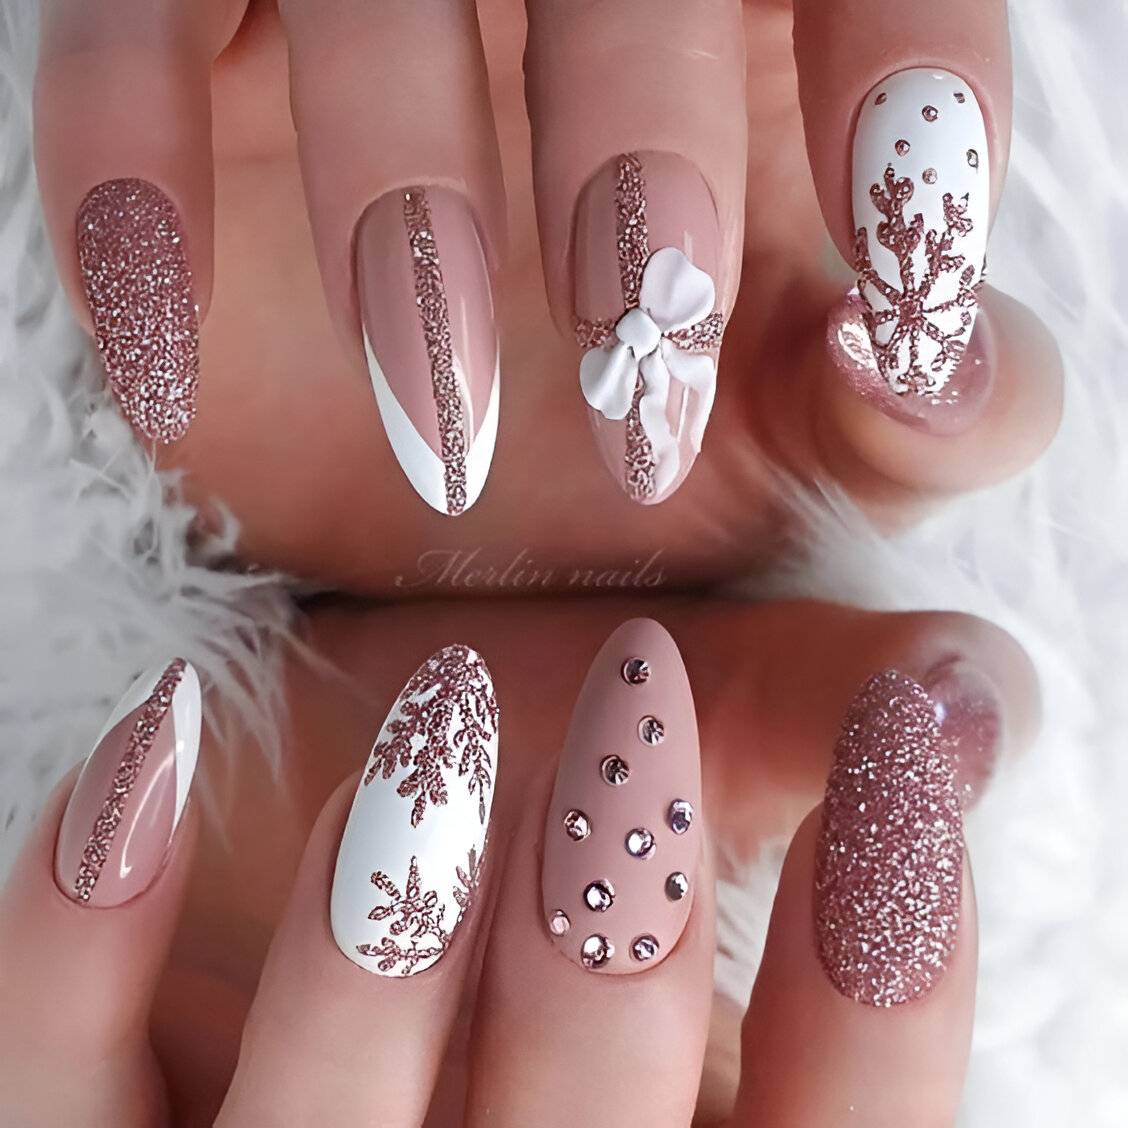 Cute Bows And Snowflakes